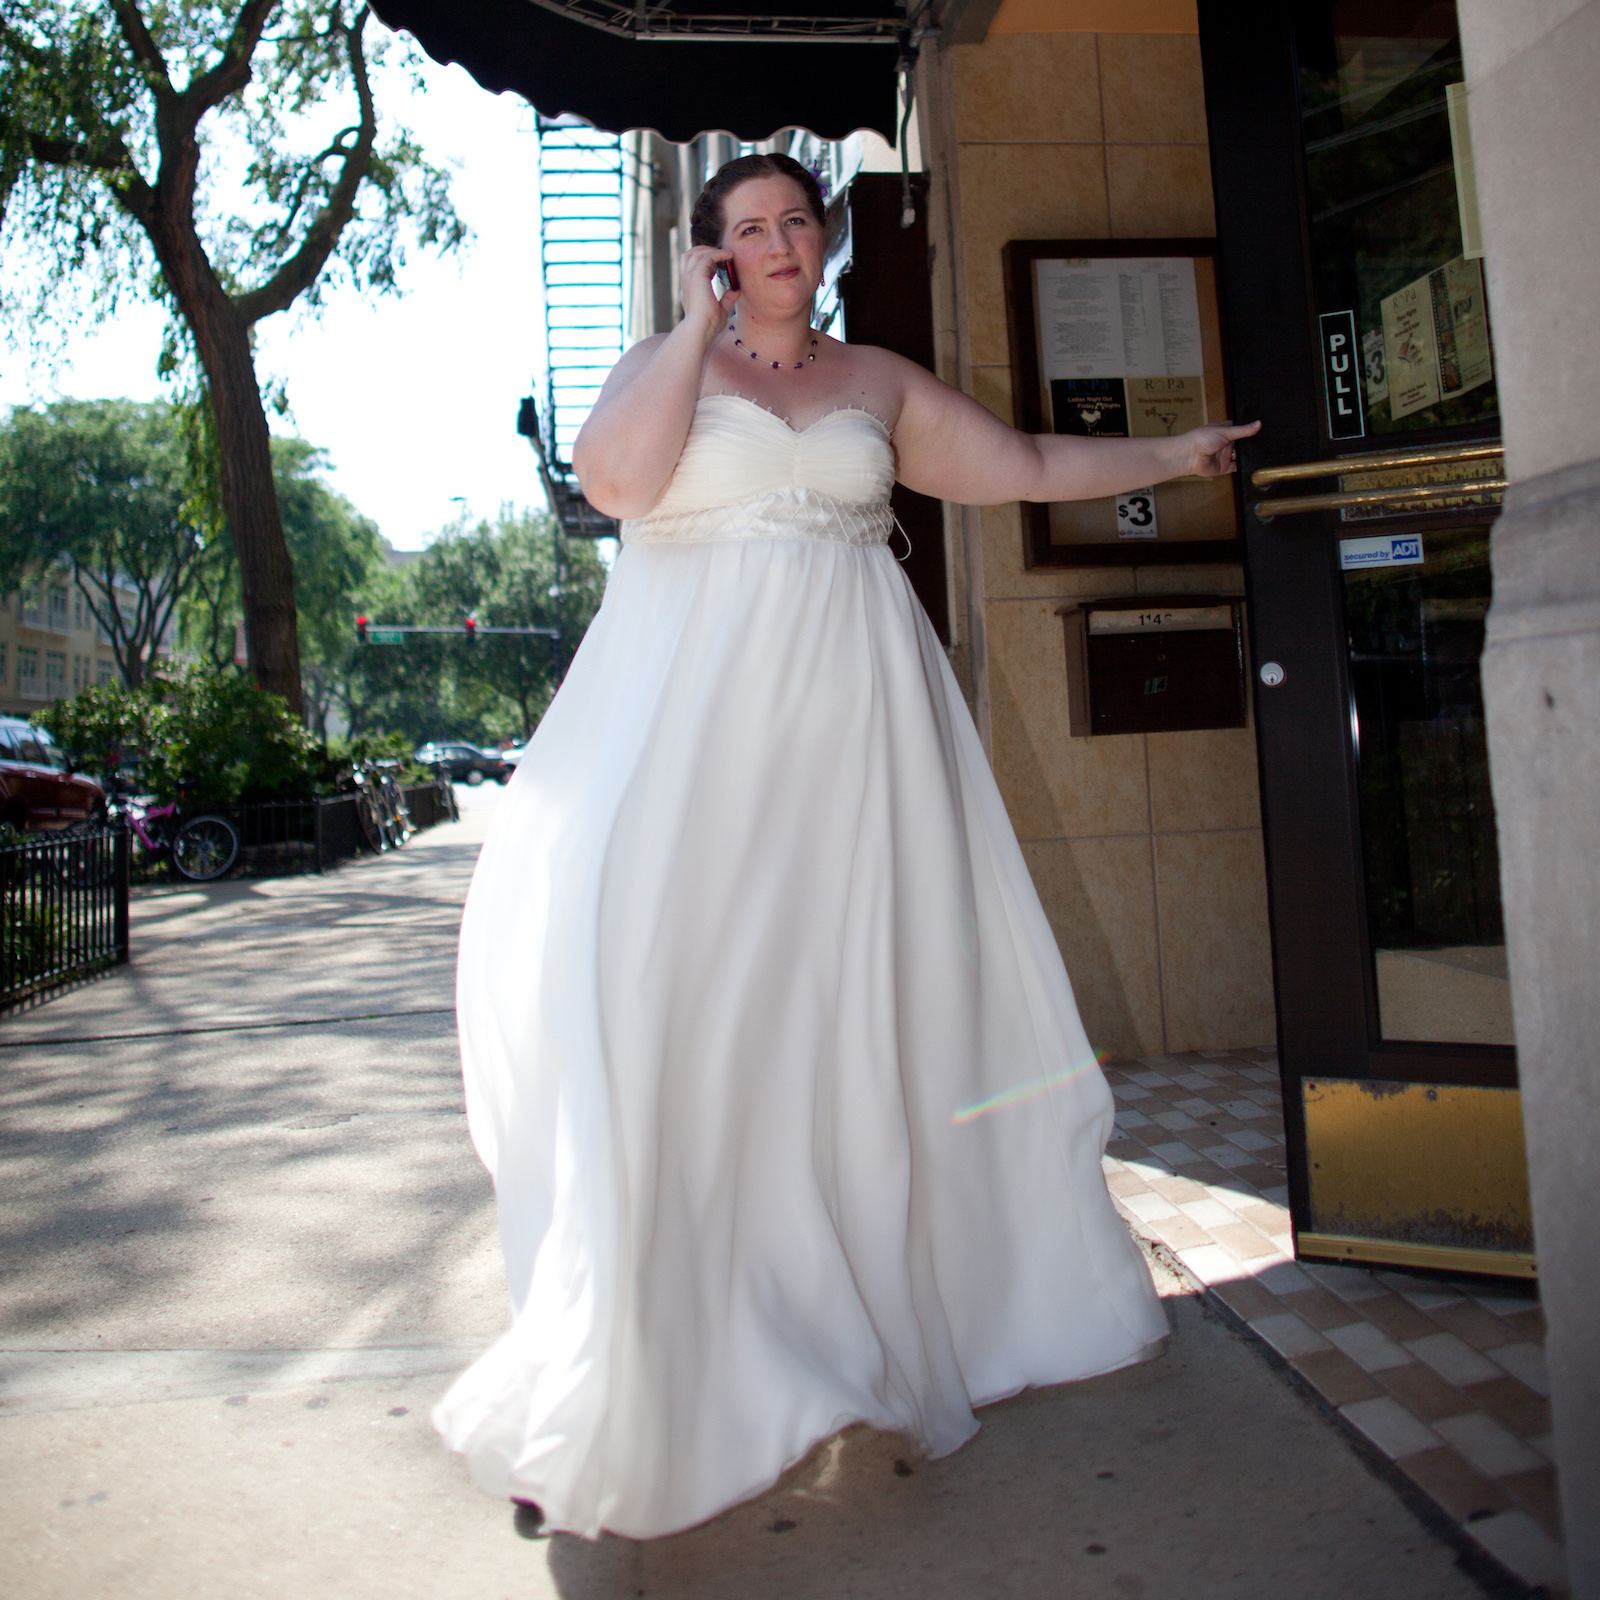 It's me, on my wedding day, making calls. Don't be like me. Let me be me and do this for you. Photo © Starbelly Studios